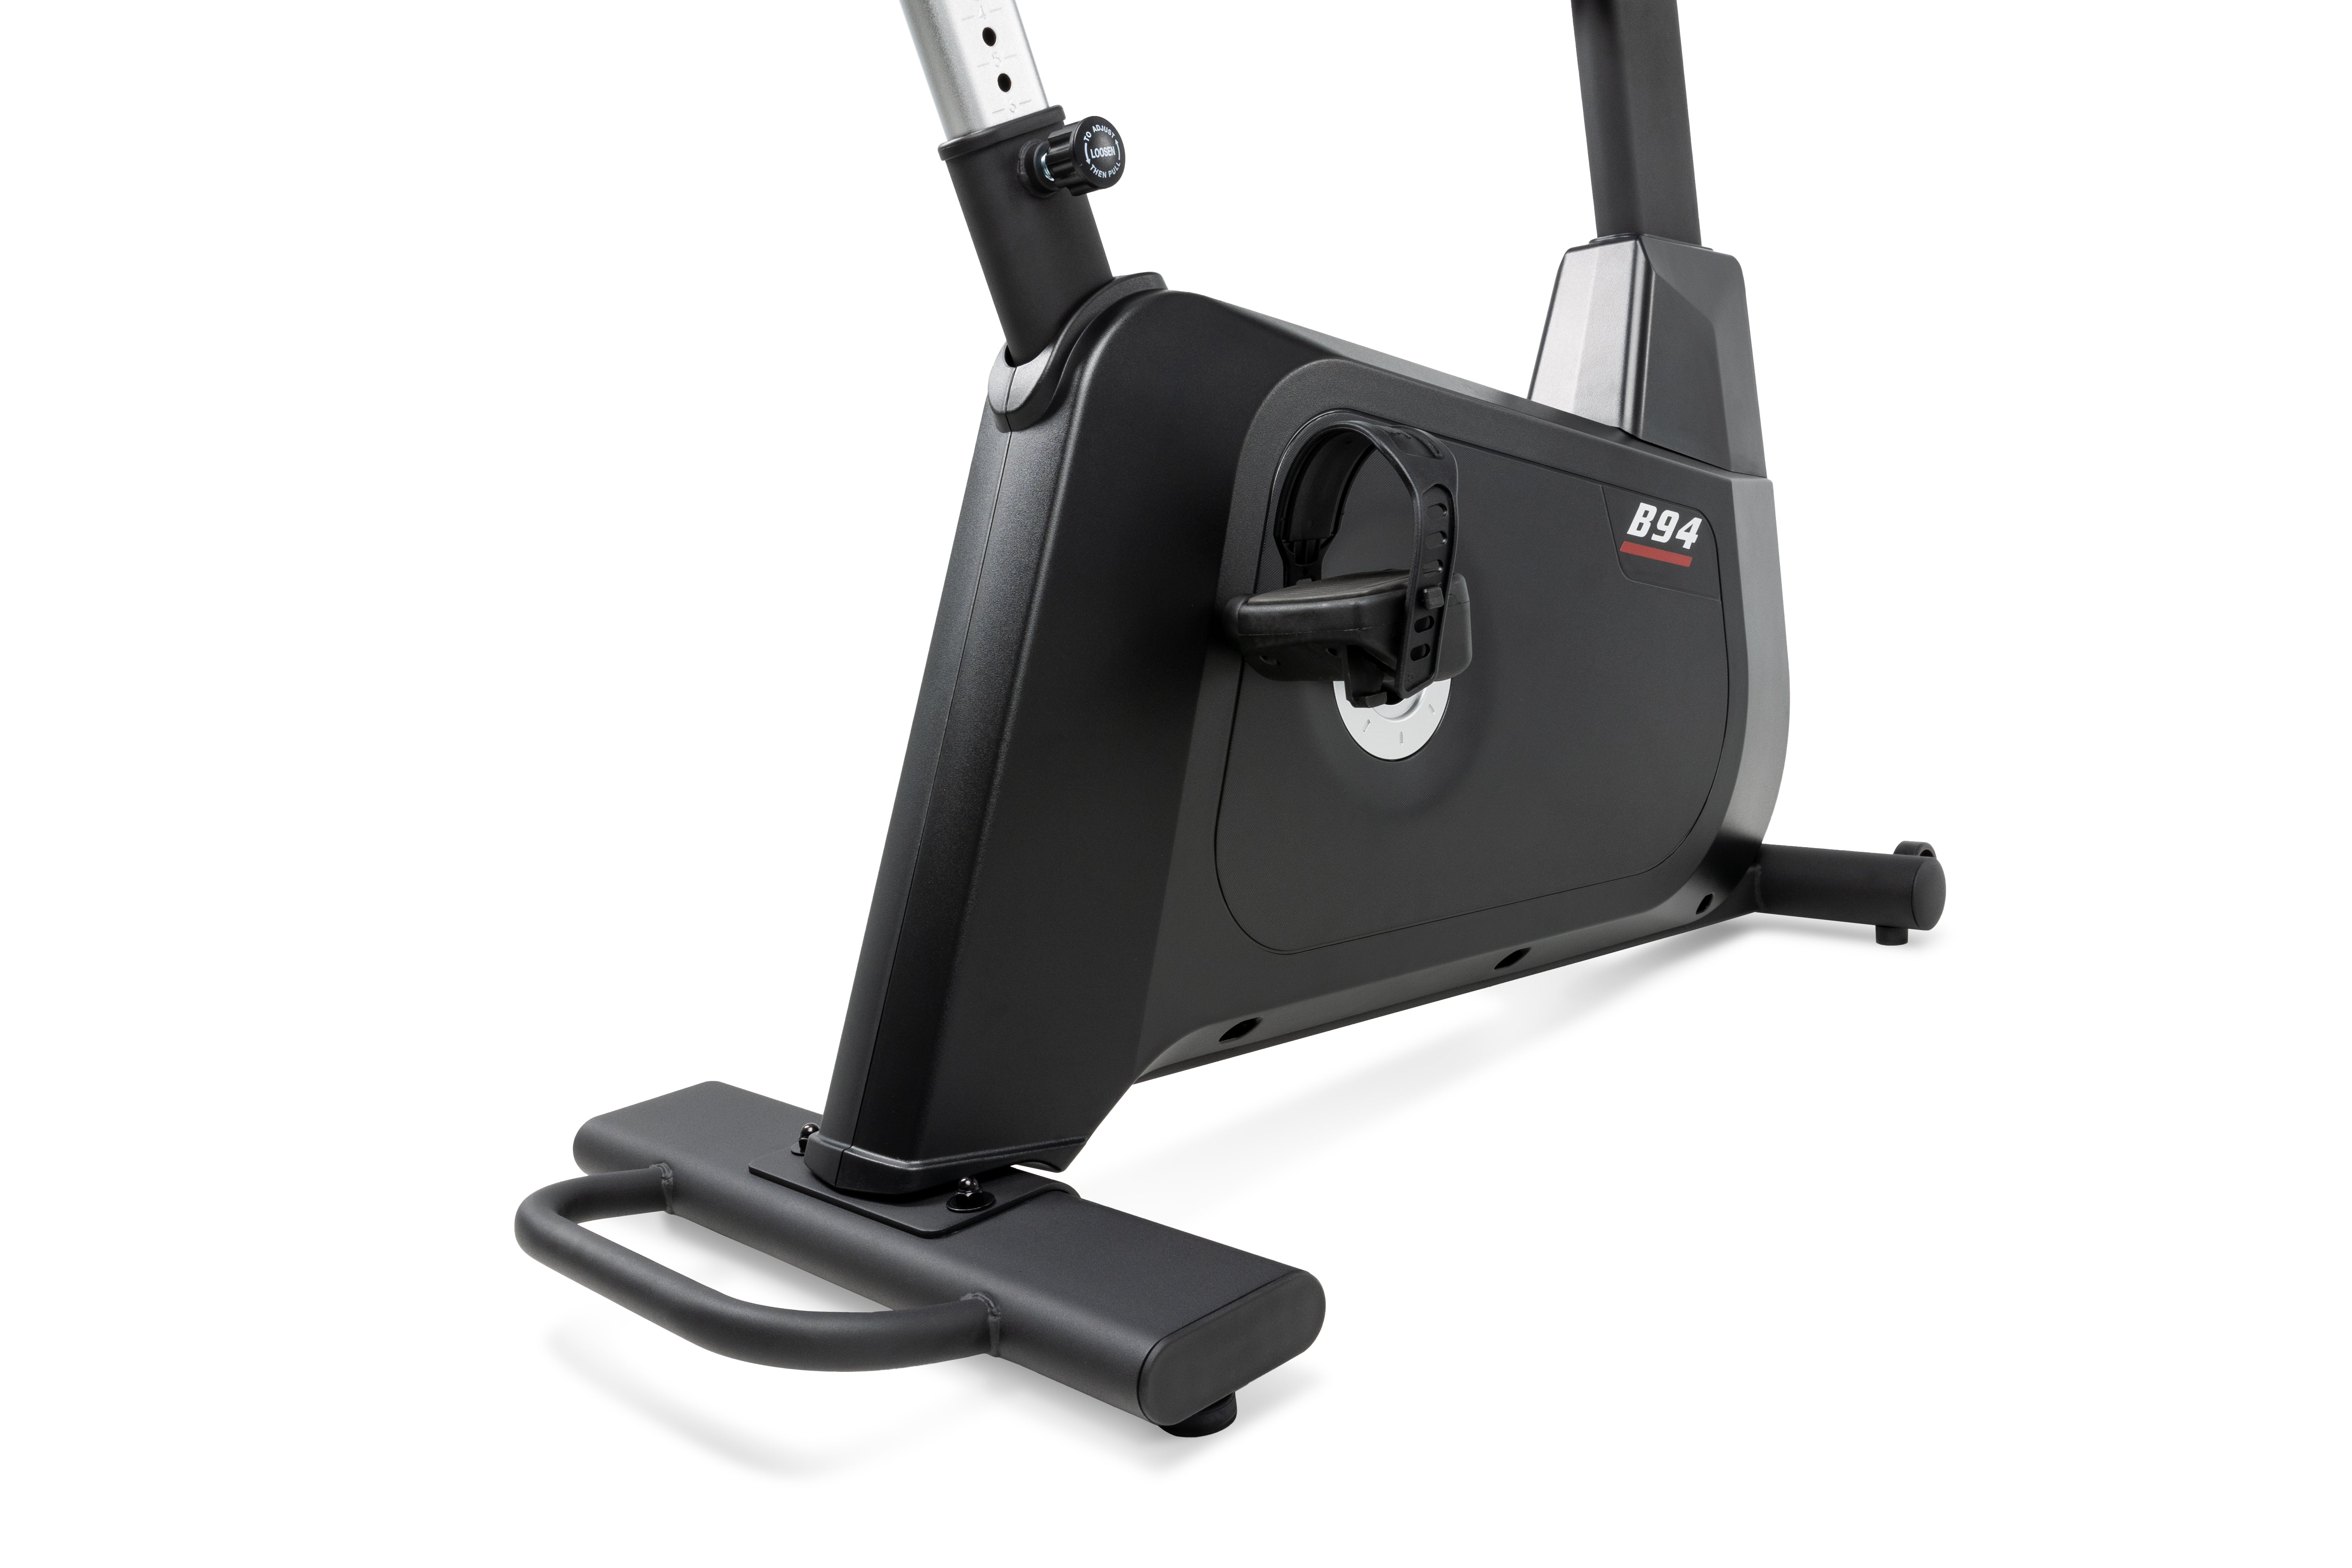 Sole B94 exercise bike showing its sleek black design, including the adjustable height mechanism, a handle, and a prominent 'B94' logo on the side.